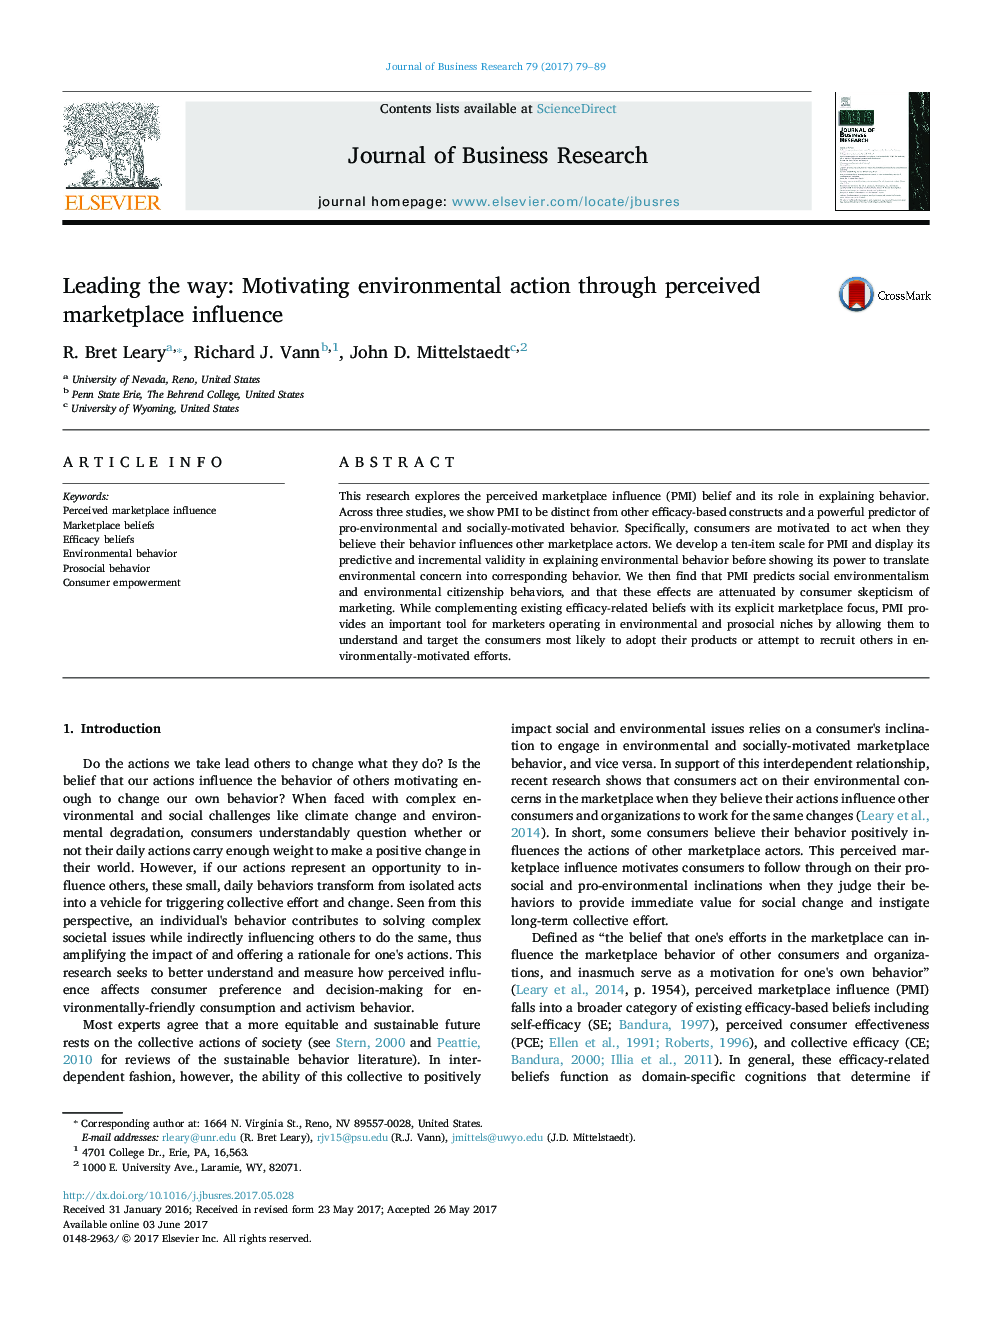 Leading the way: Motivating environmental action through perceived marketplace influence